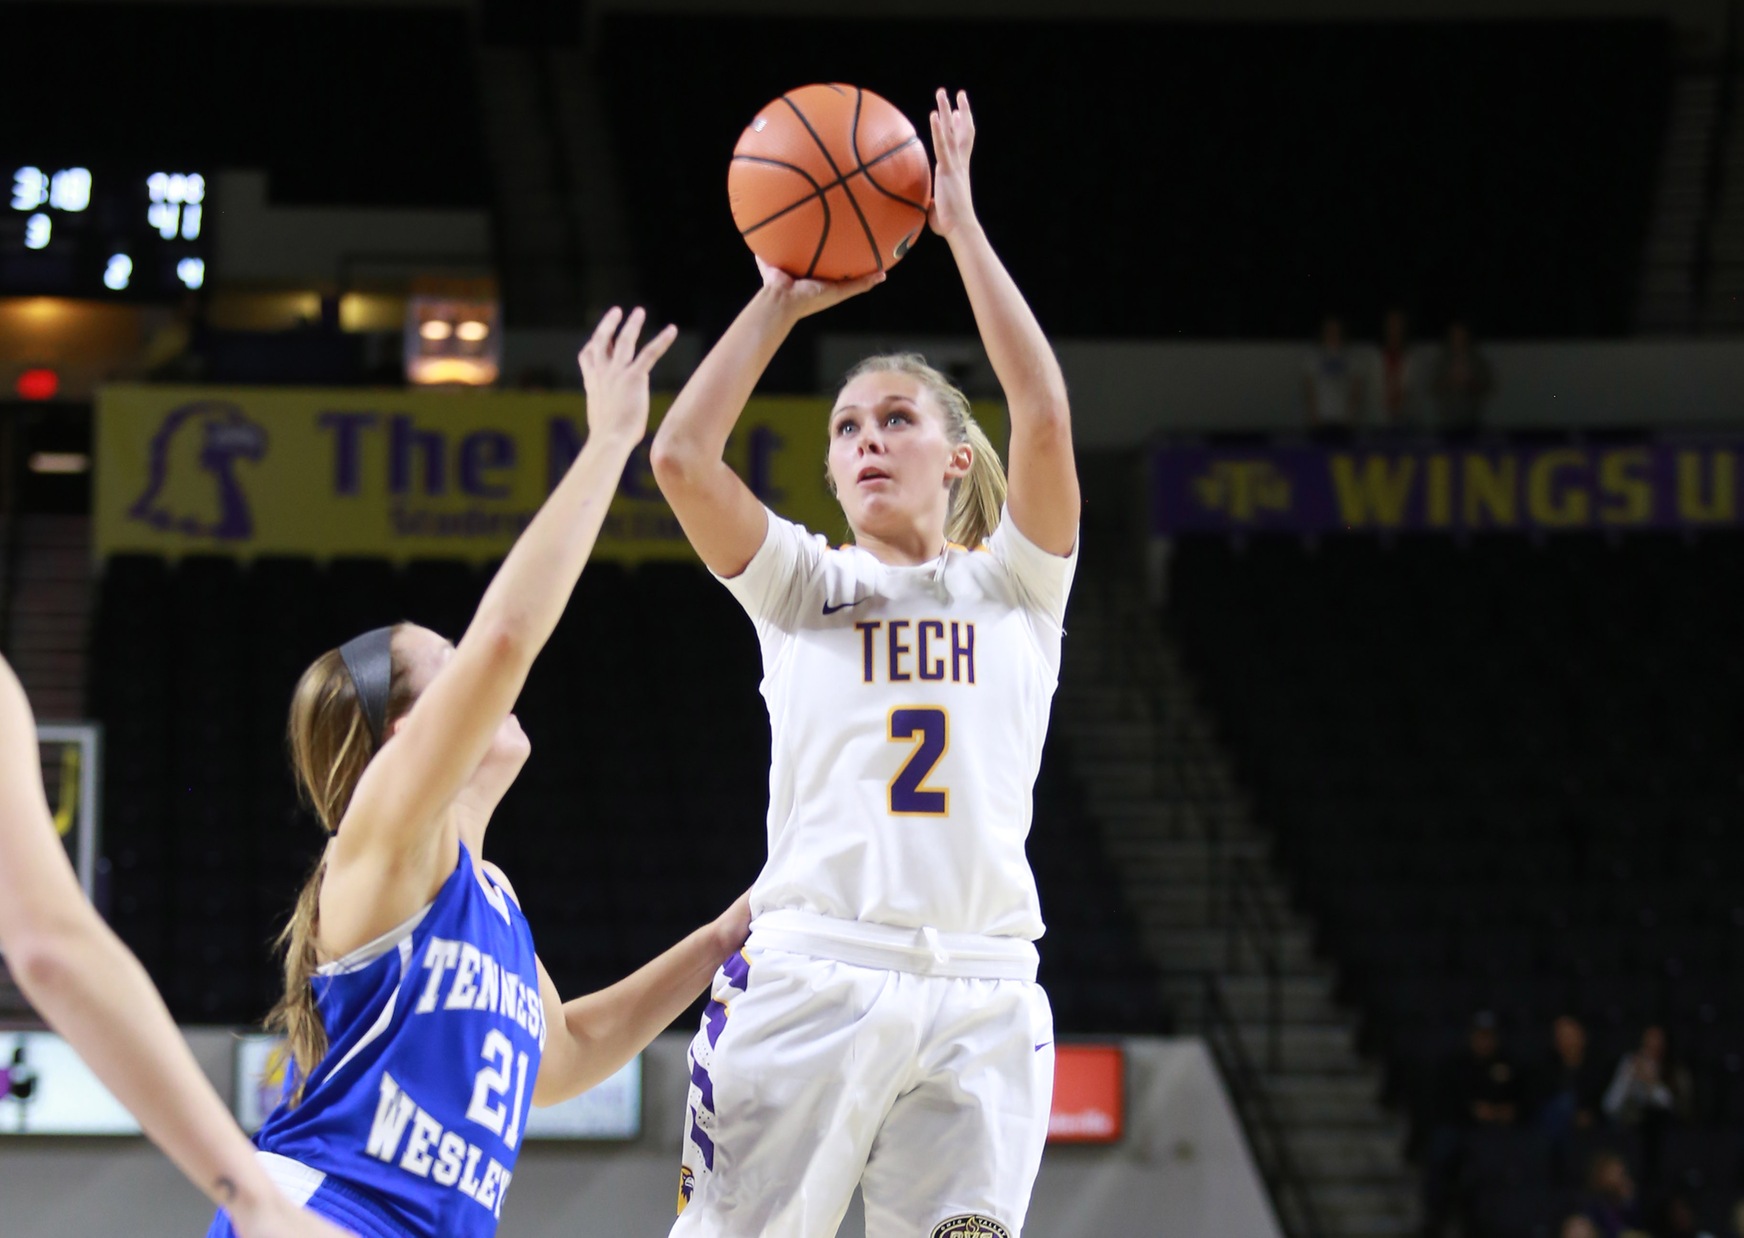 Tech's offensive effort pushes Golden Eagles to season-opening win over Tennessee Wesleyan